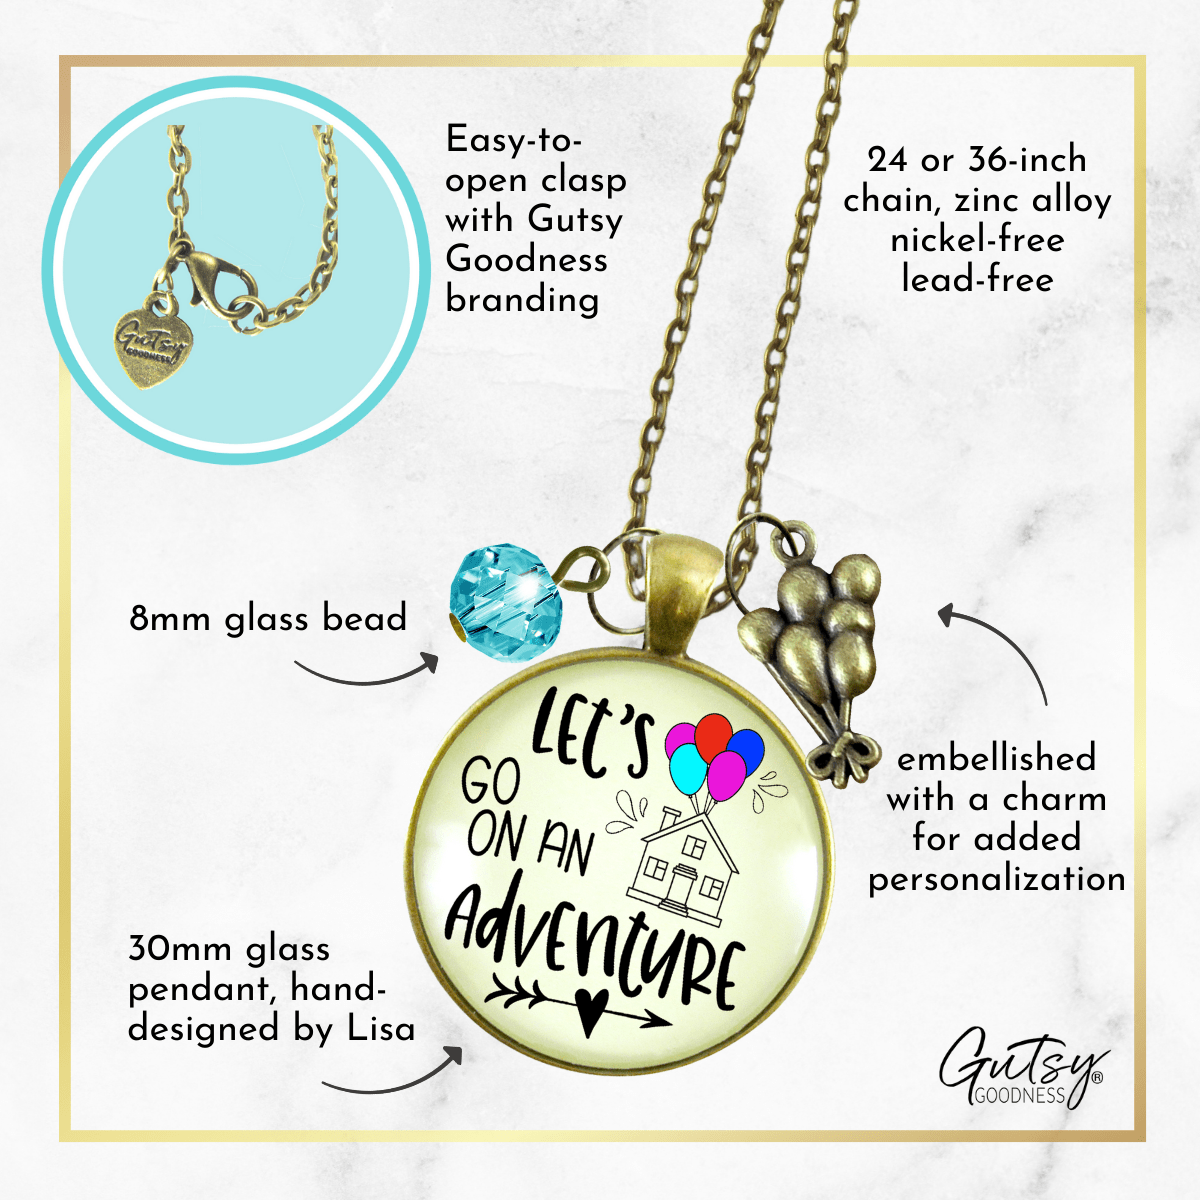 Gutsy Goodness Let's Go on an Adventure Necklace Balloon House Charm Trip Key Ring - Gutsy Goodness Handmade Jewelry;Let's Go On An Adventure Necklace Balloon House Charm Trip Key Ring - Gutsy Goodness Handmade Jewelry Gifts